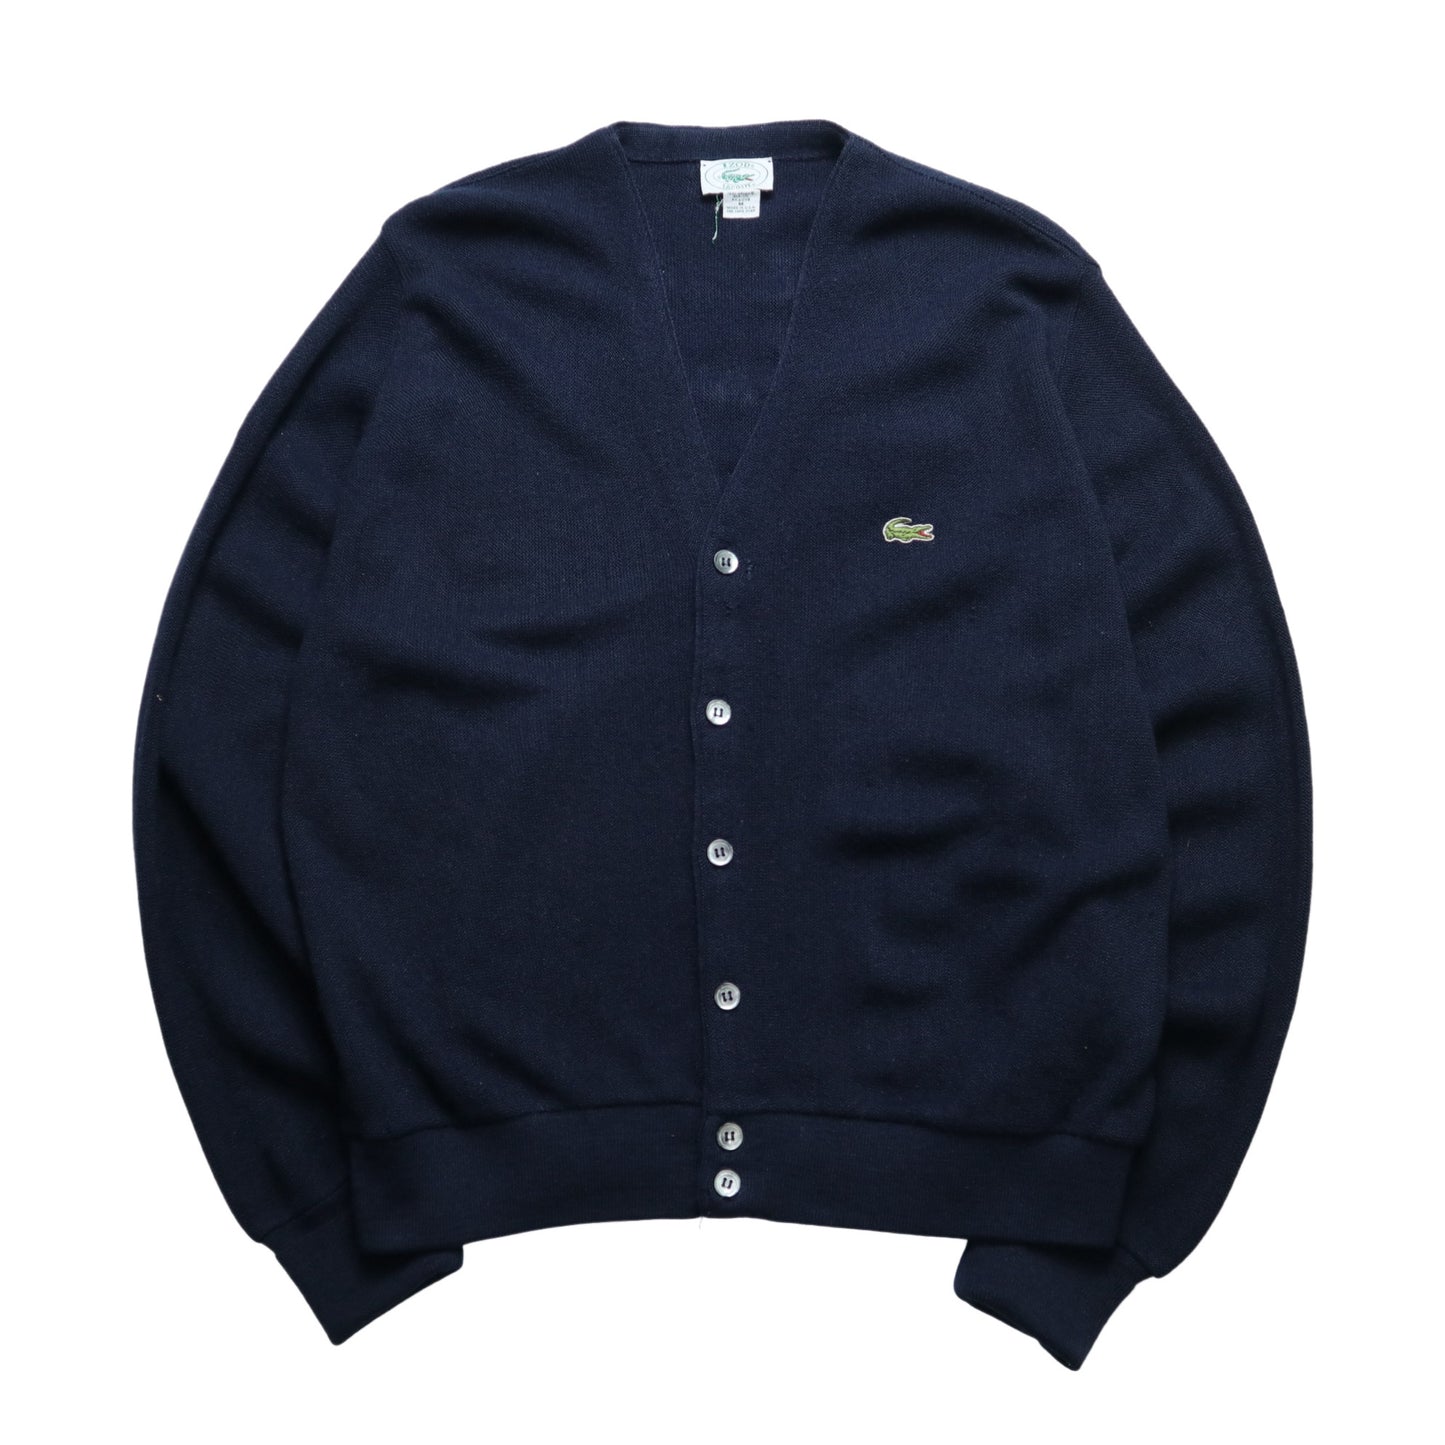 1980s Lacoste IZOD American-made blue and black cardigan sweater